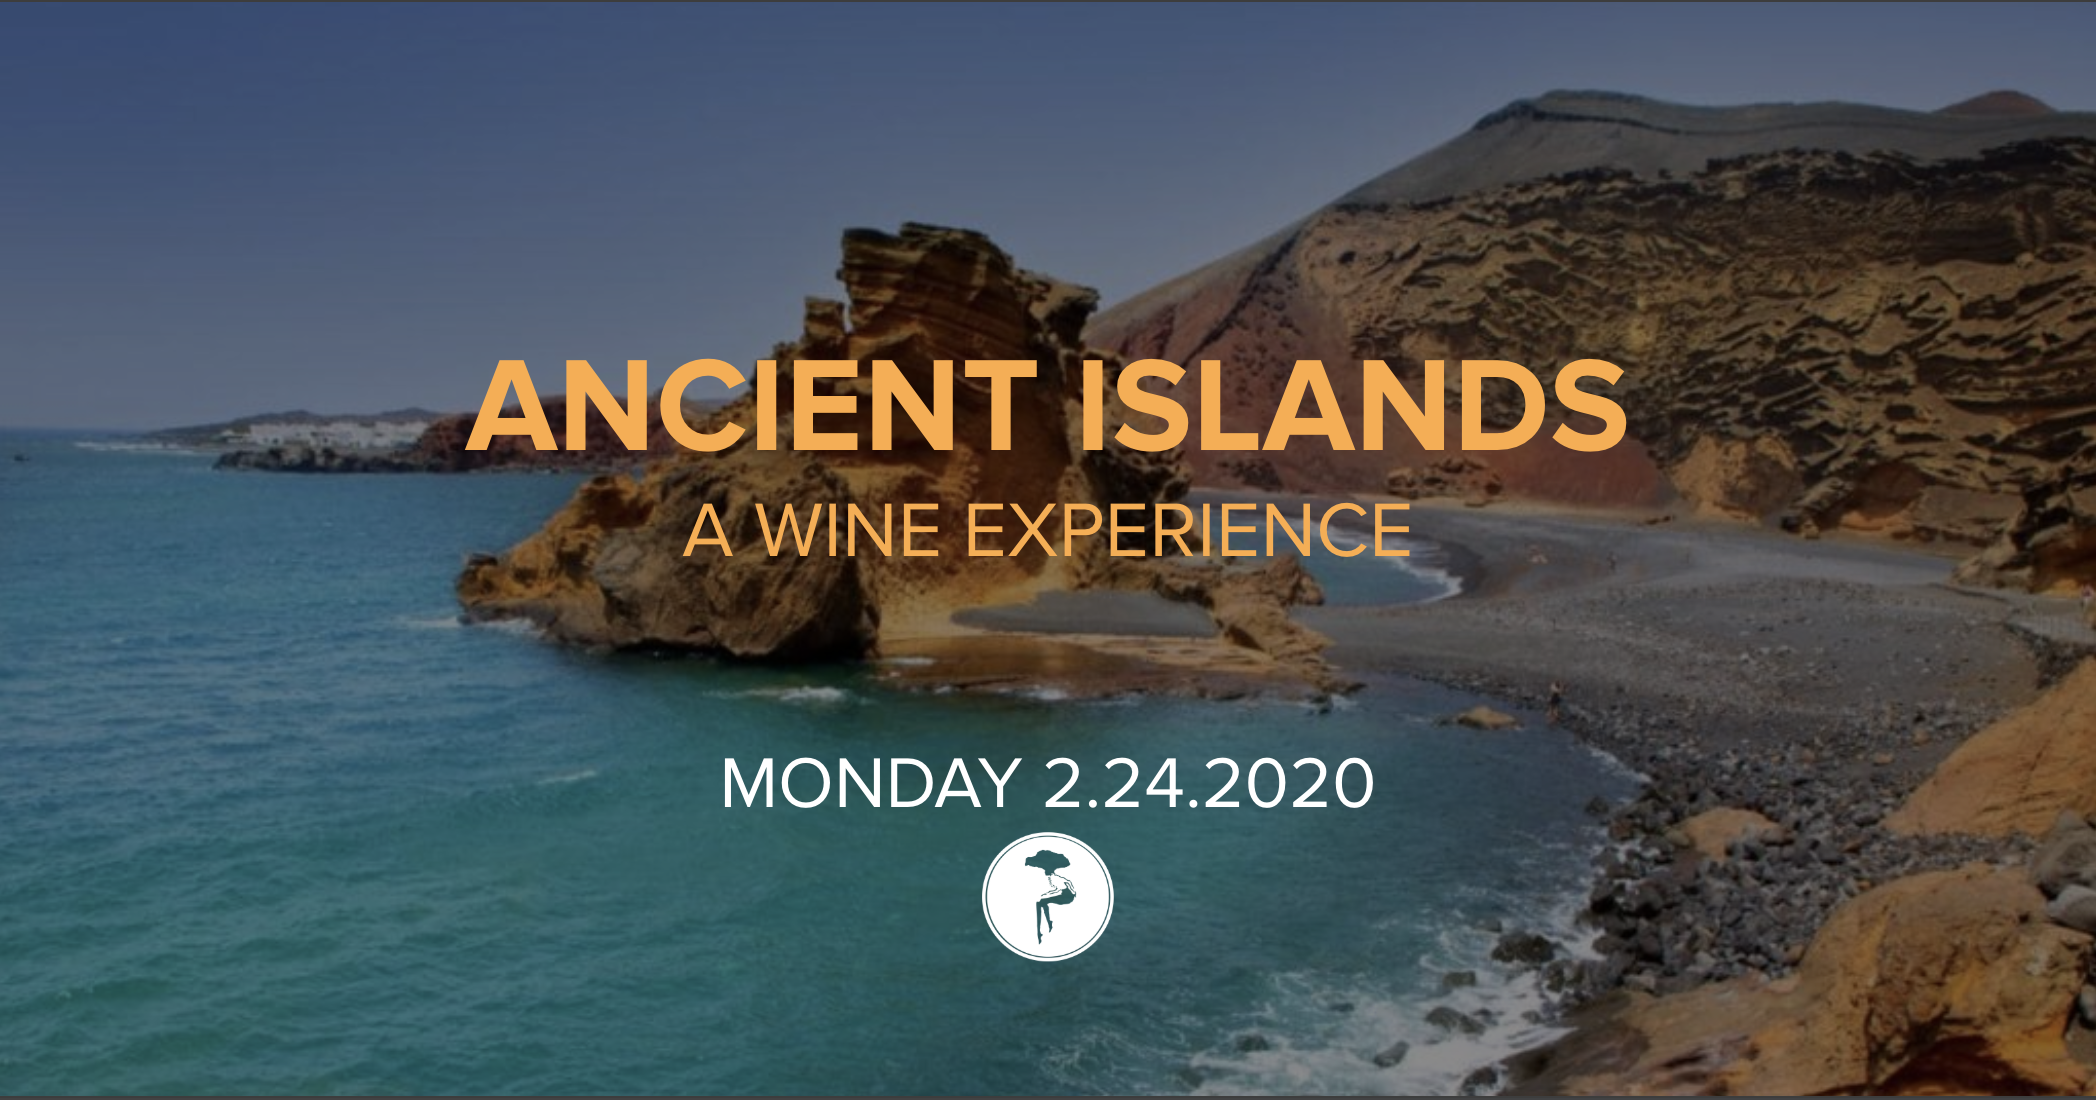 Ancient Islands: A Wine Experience